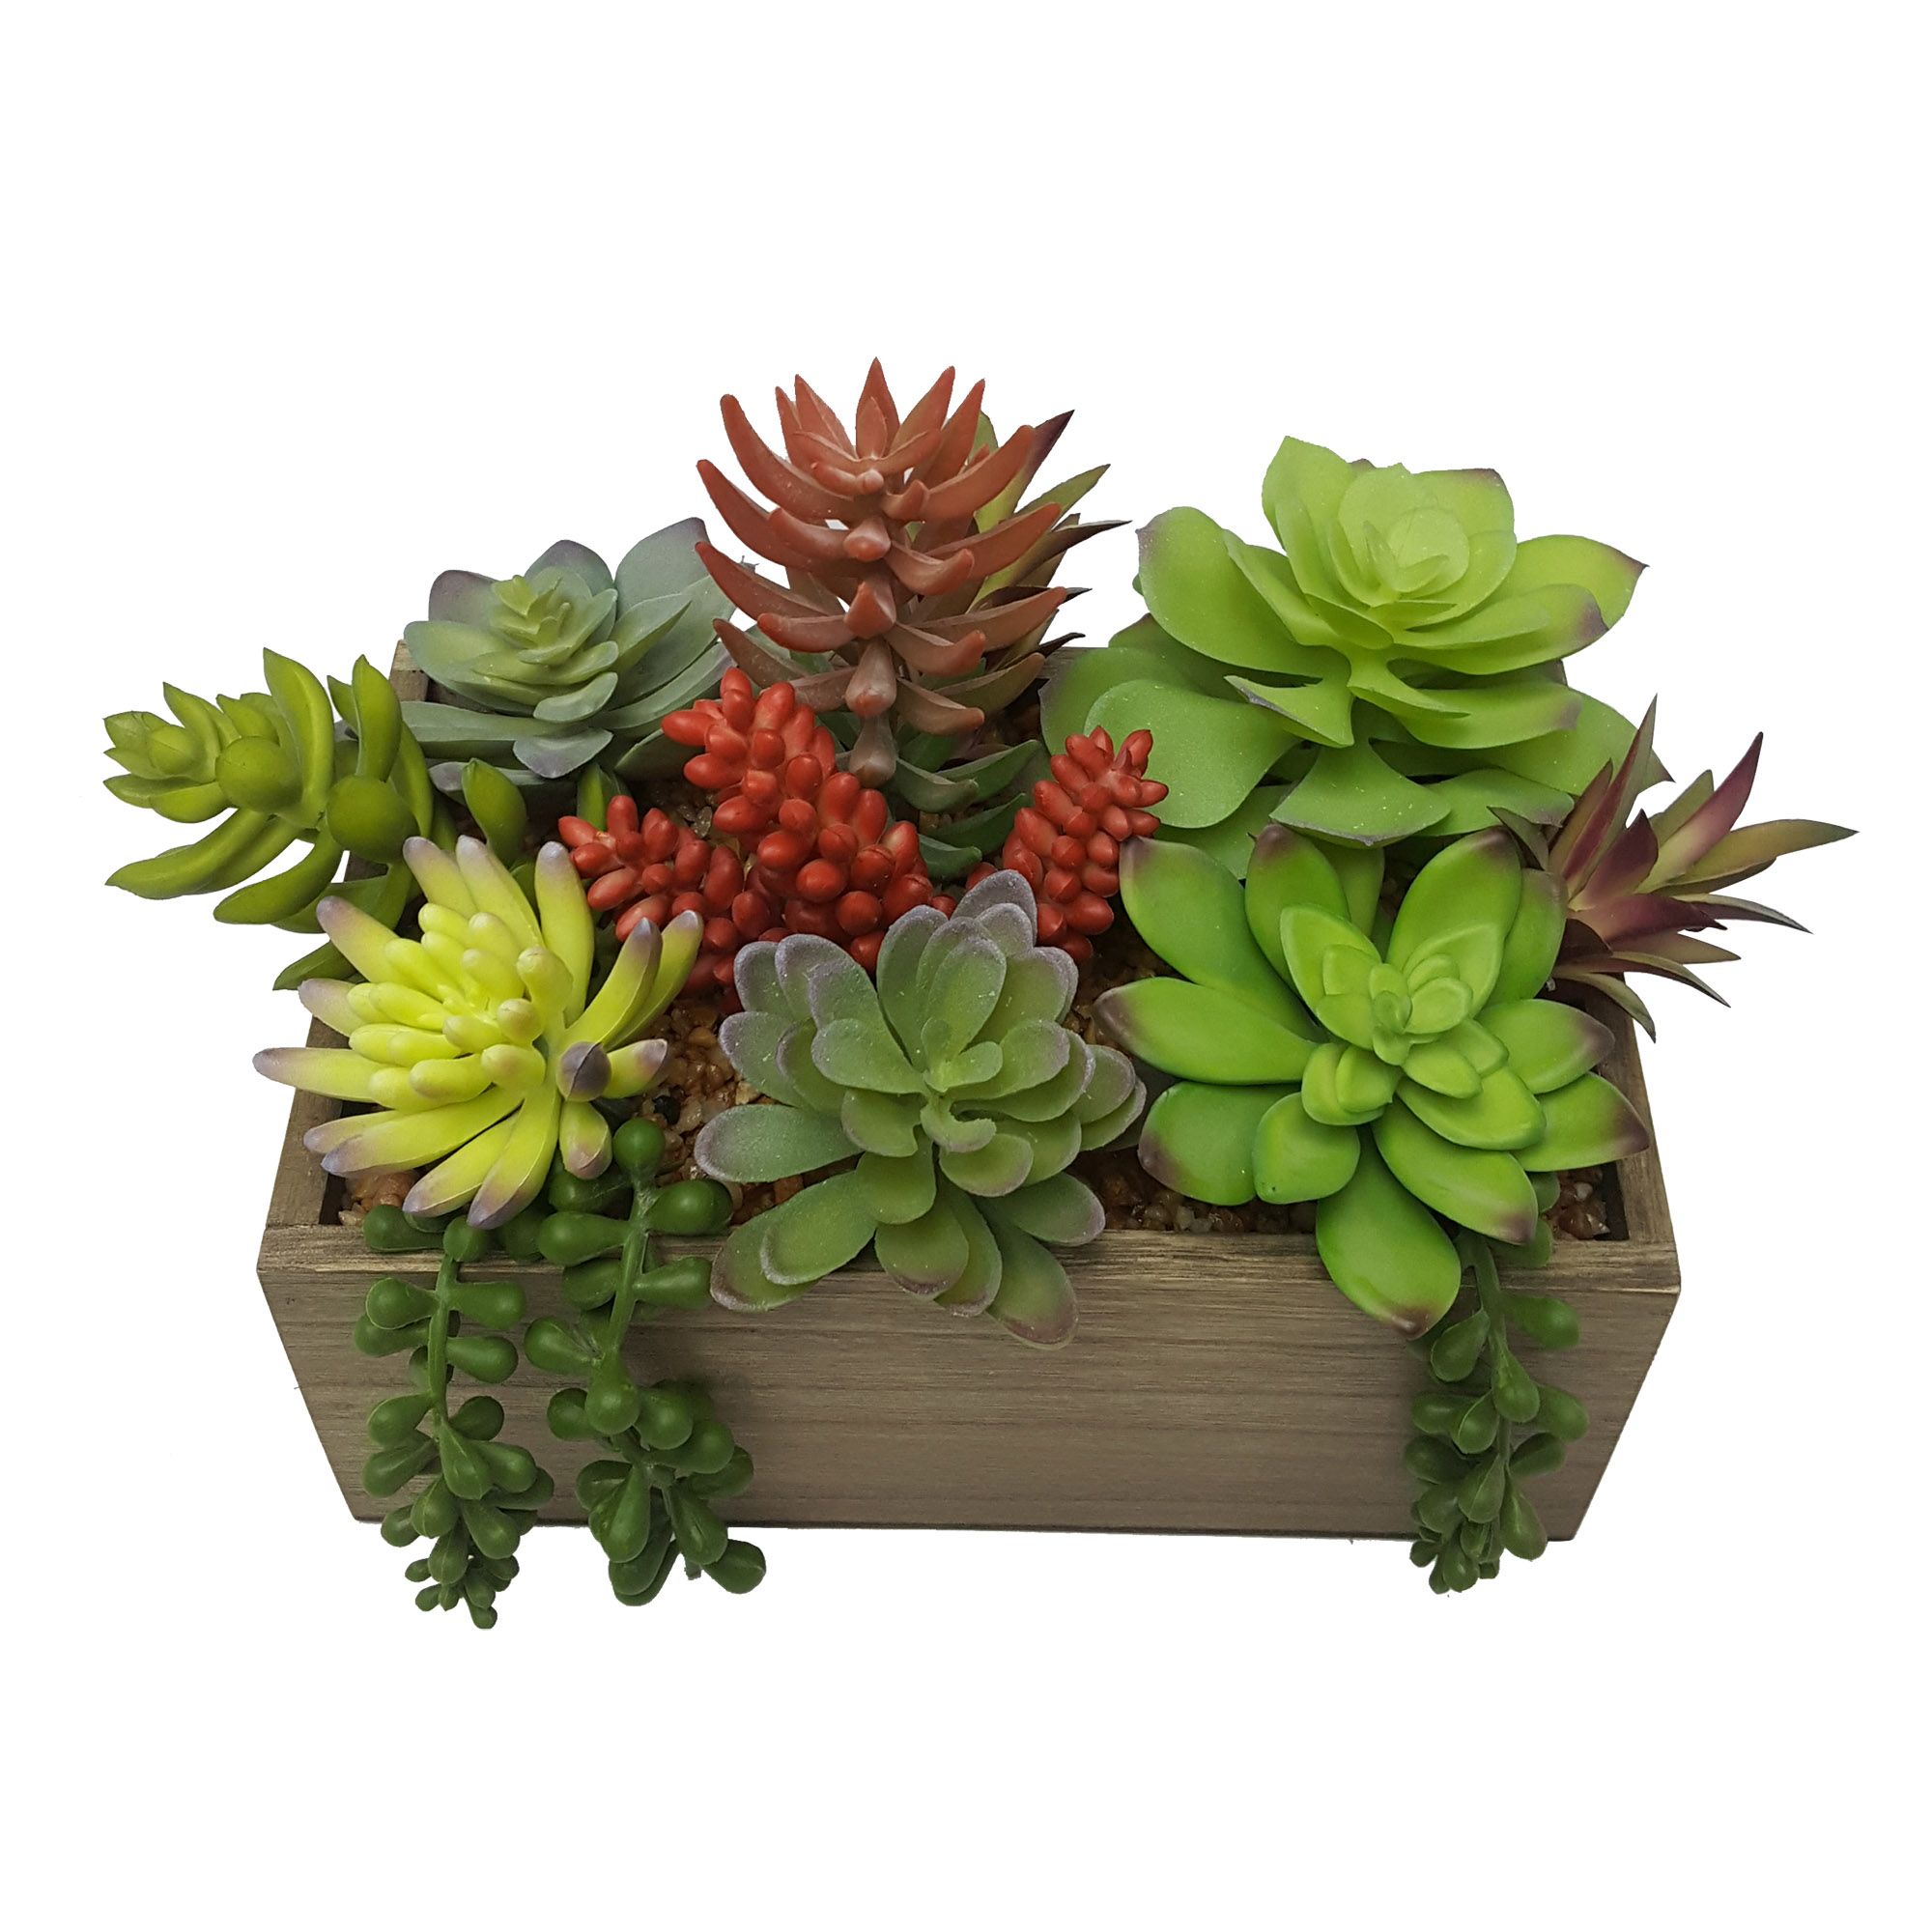 Better Homes & Gardens 7.5" Artificial Mixed Succulent Plants in Brown Wood Box - image 3 of 7